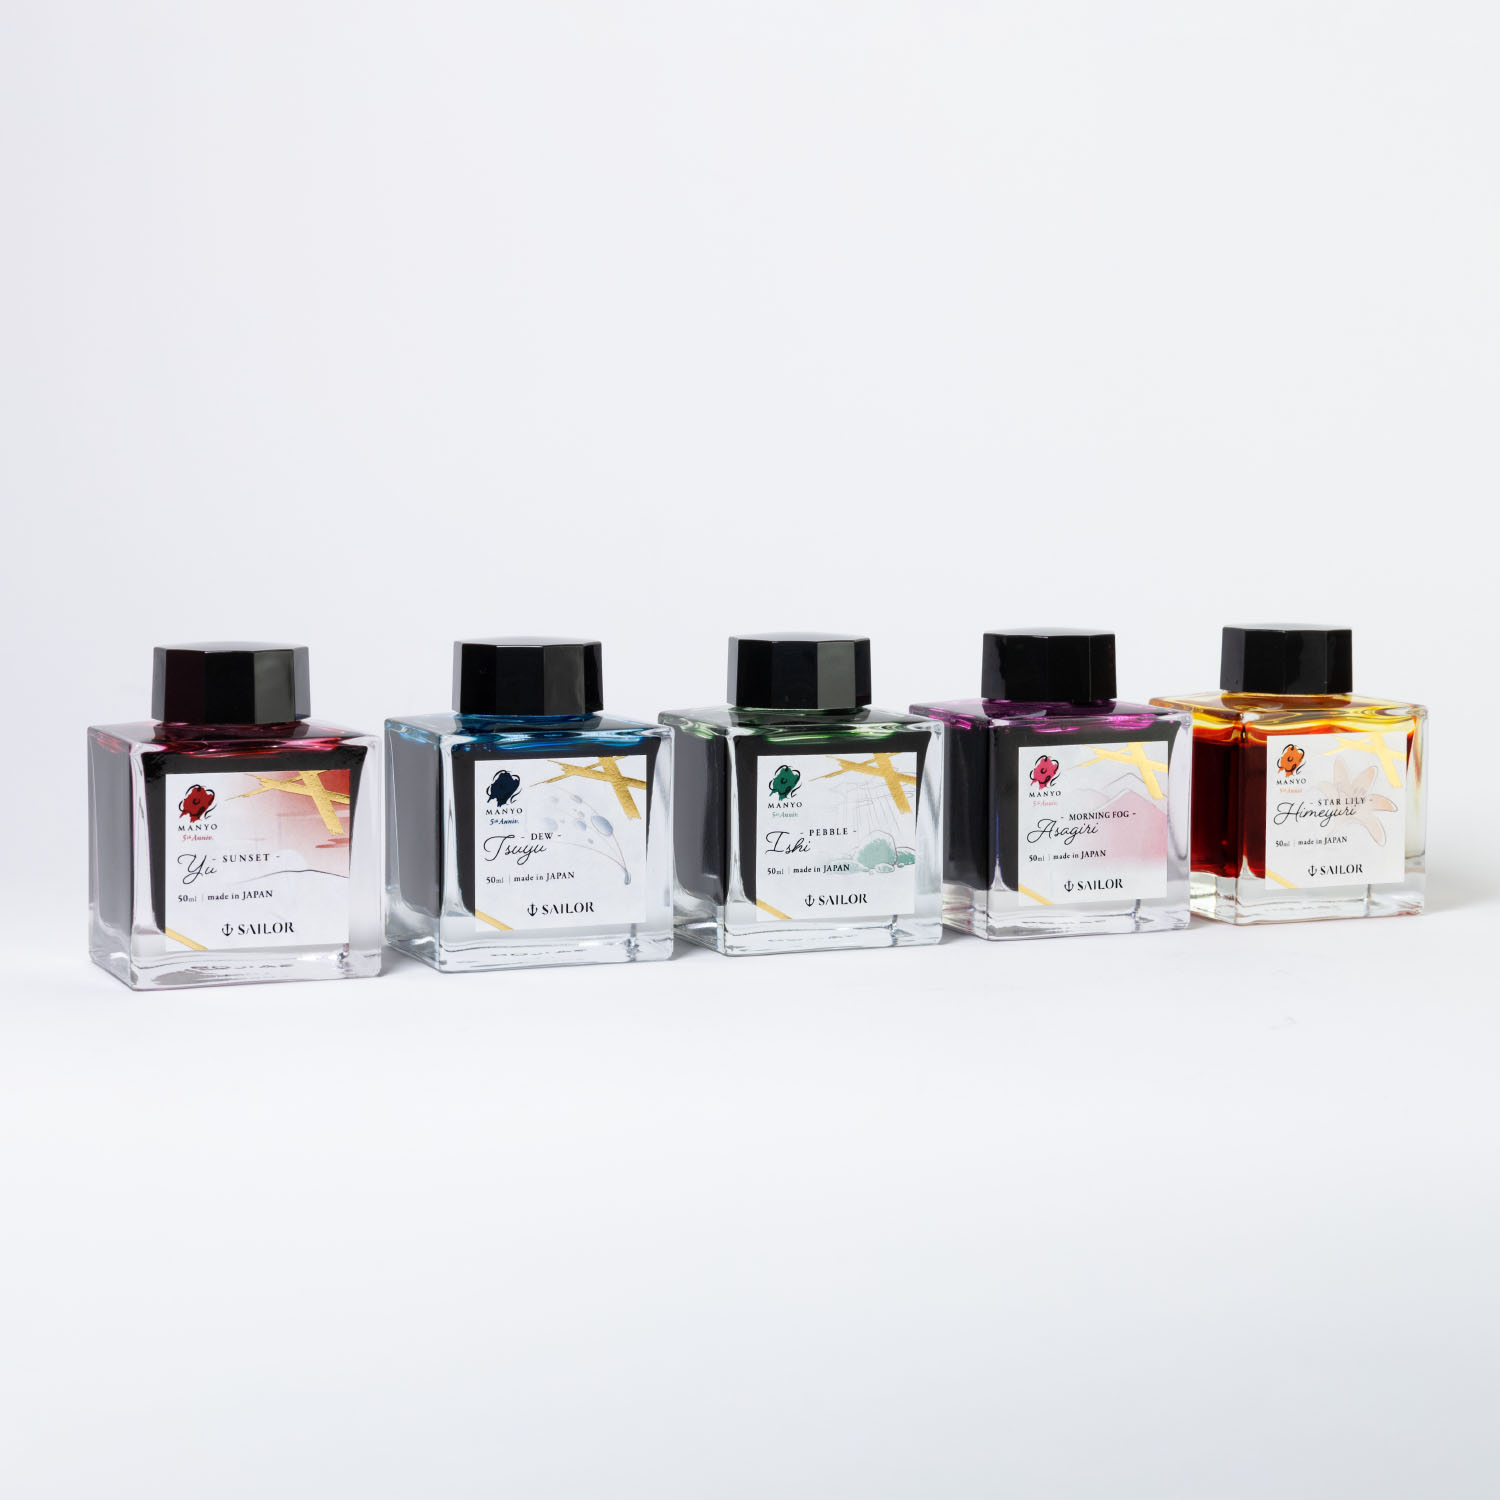 SAILOR MANYO 5TH ANNIVERSARY INK COLLECTION